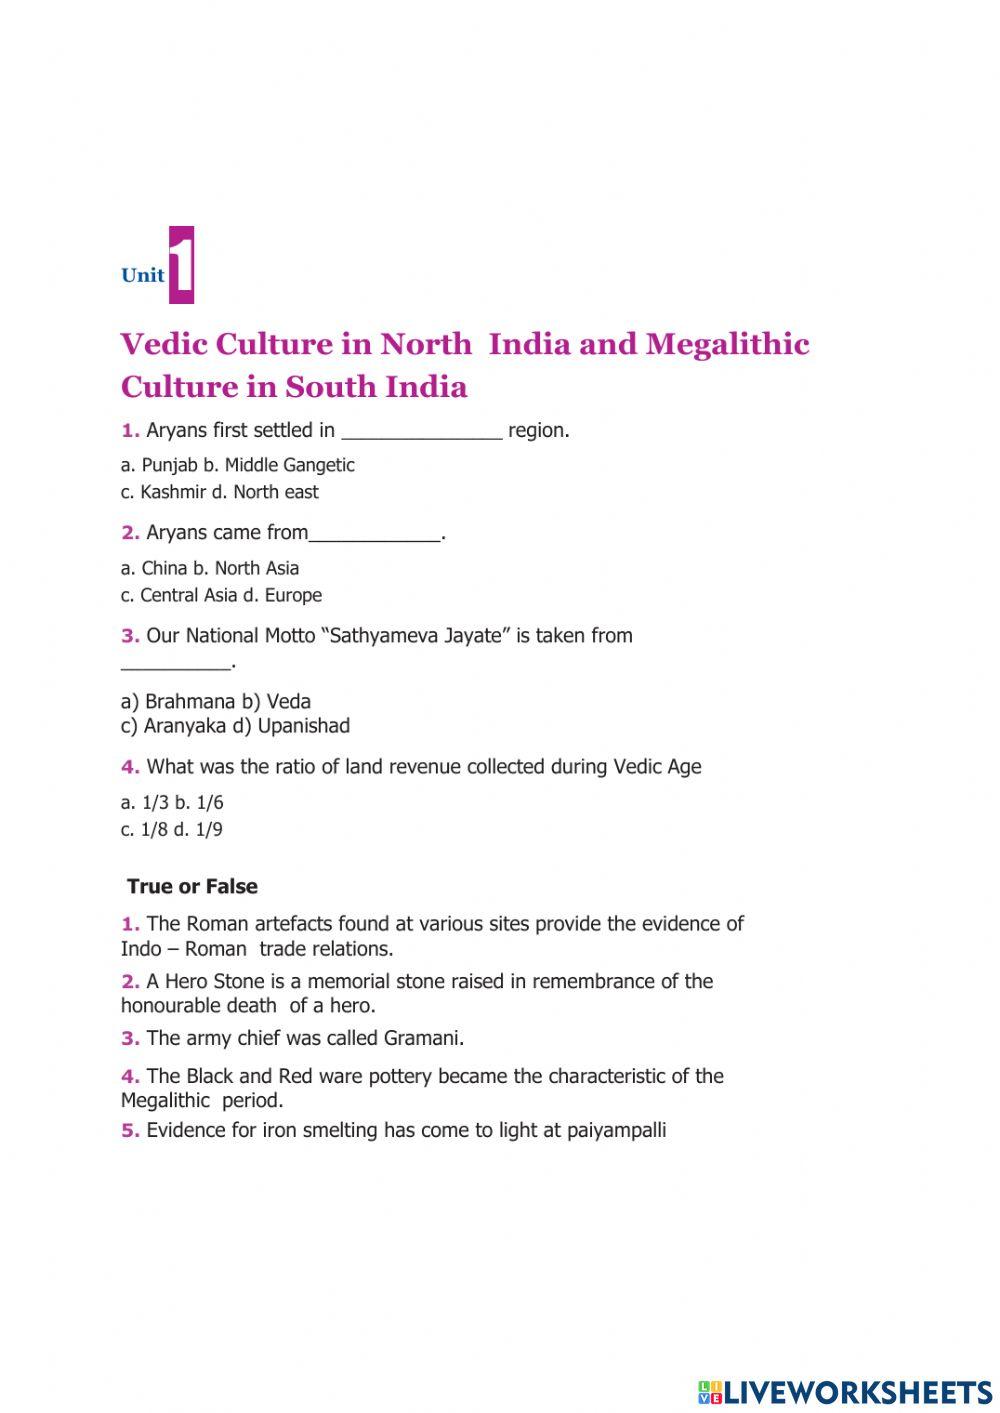 Vedic Culture In North India and Megalithic Culture in South India